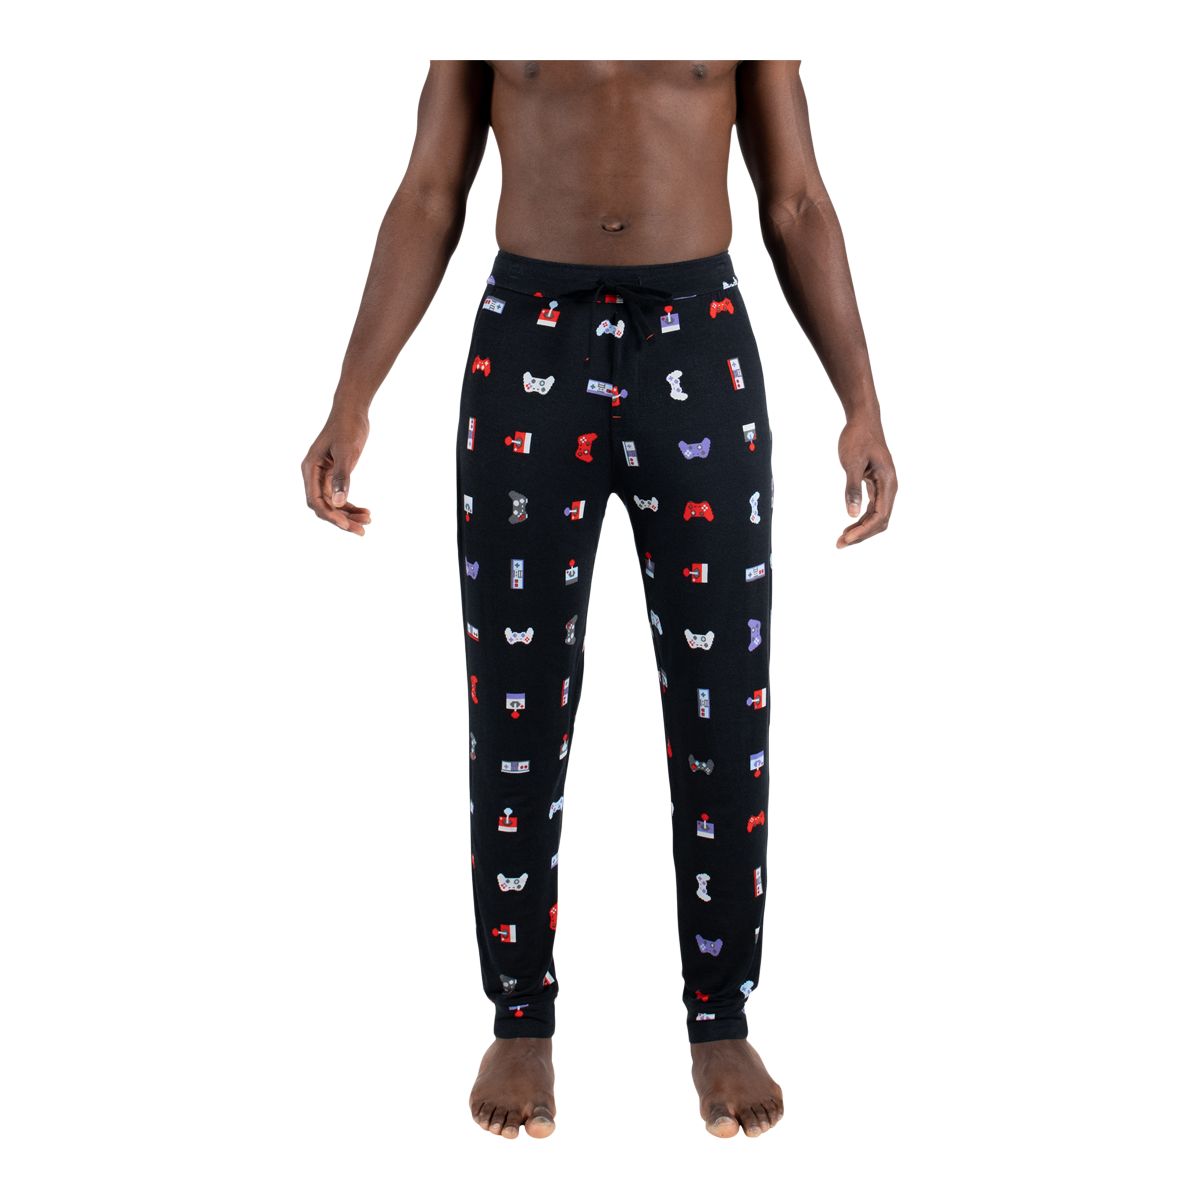 Saxx Men's Snooze Jogger Lounge Pants with Elastic Waistband